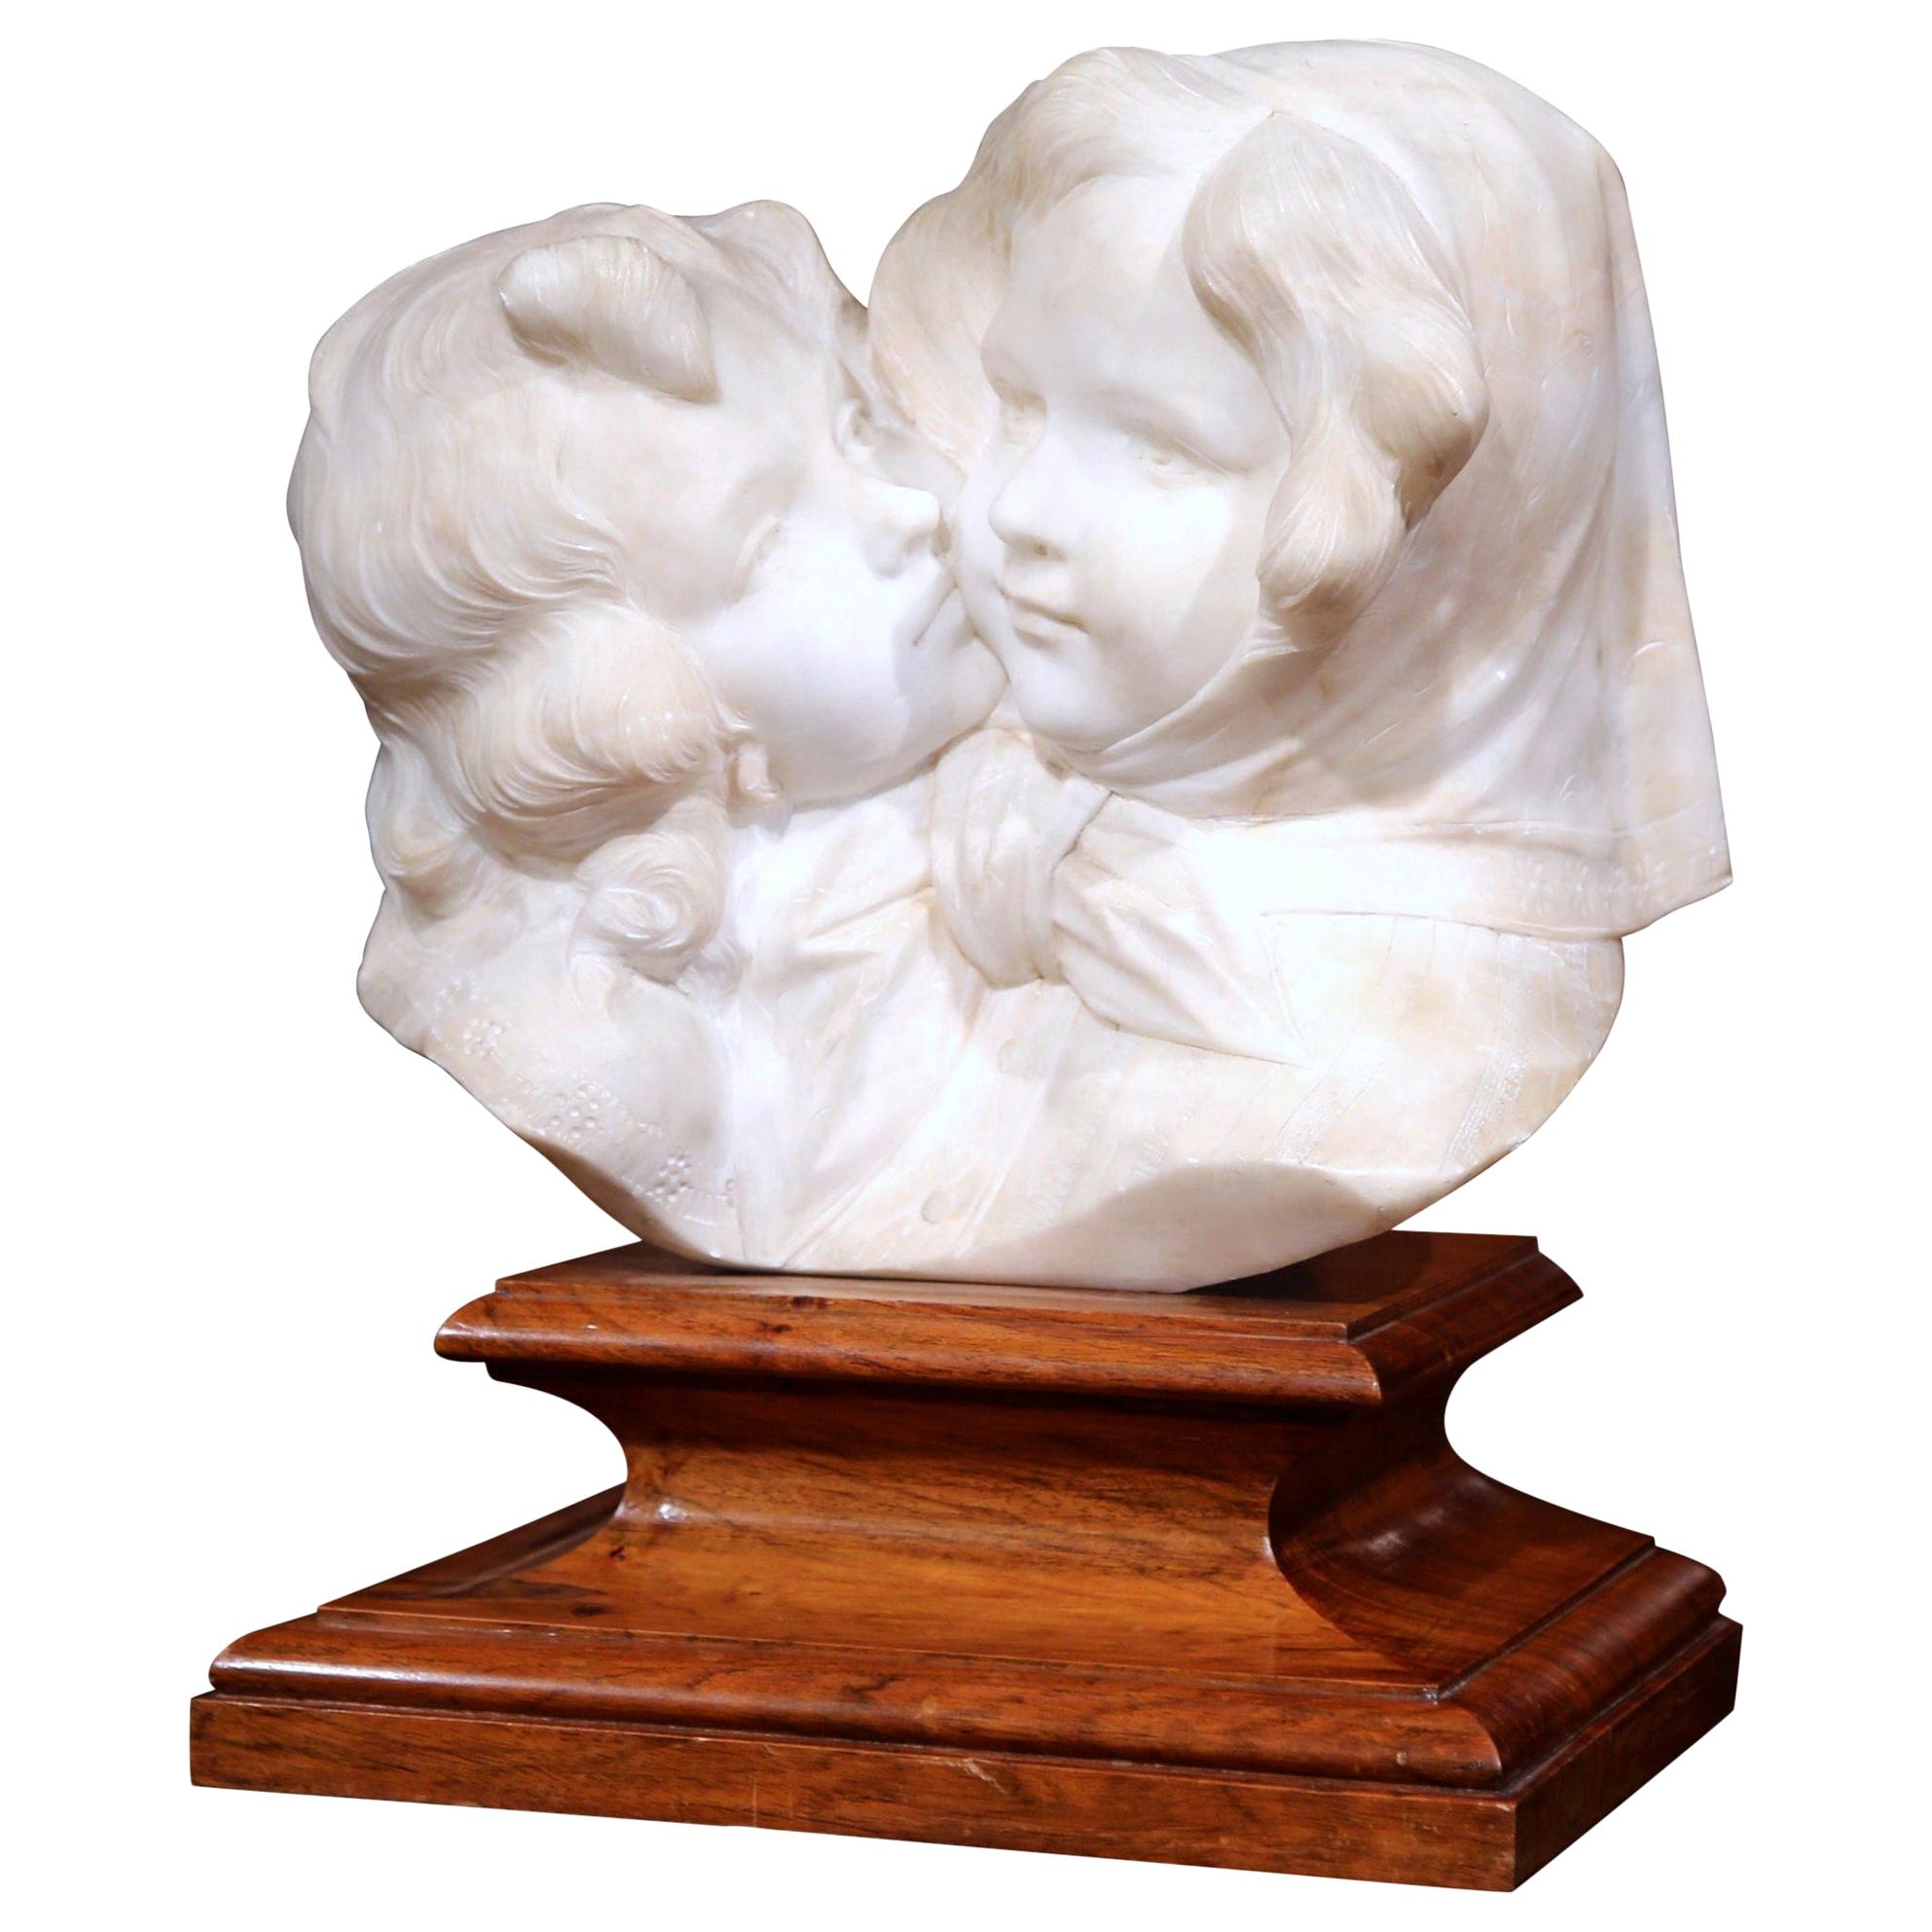 Early 20th Century Italian Carved Marble Sculpture on Wood Stand Signed A. Gory For Sale